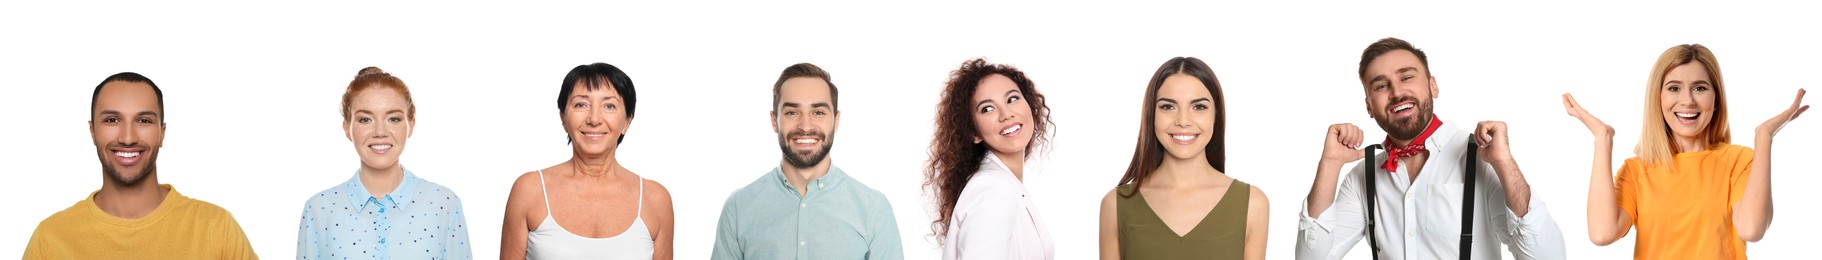 Collage with portraits of happy people on white background